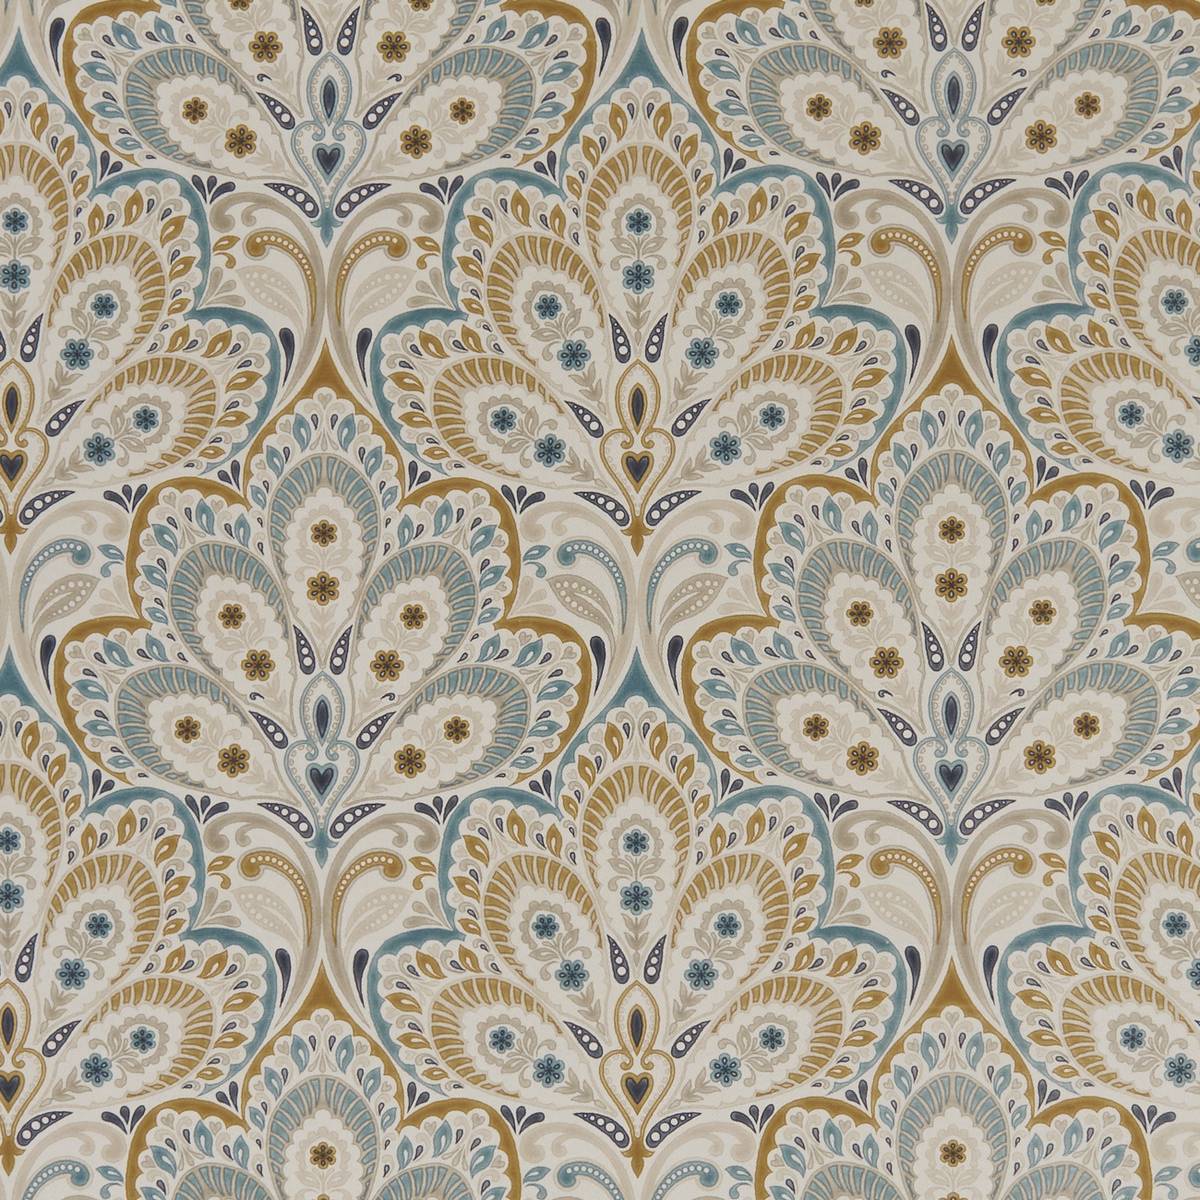 Persia Teal/Spice Fabric by Clarke & Clarke